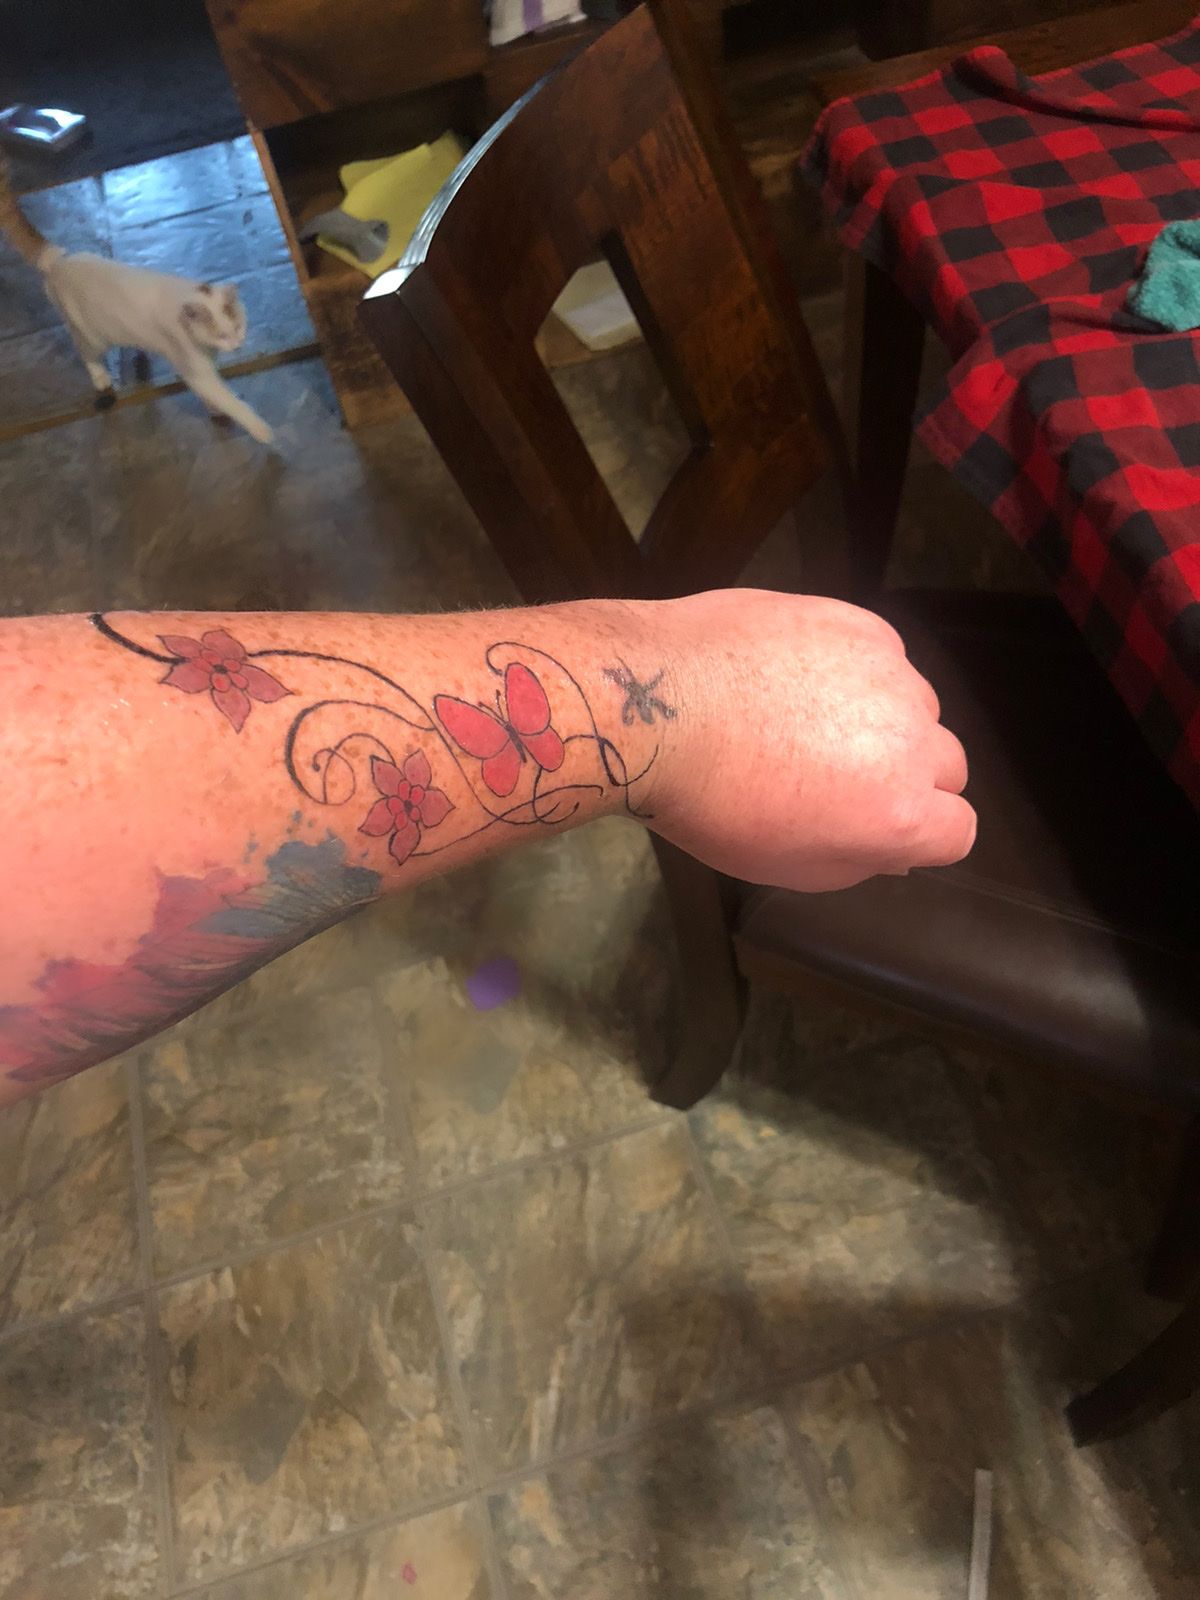 Is it normal for the tattoo outlining to bleed out under the skin? - Quora